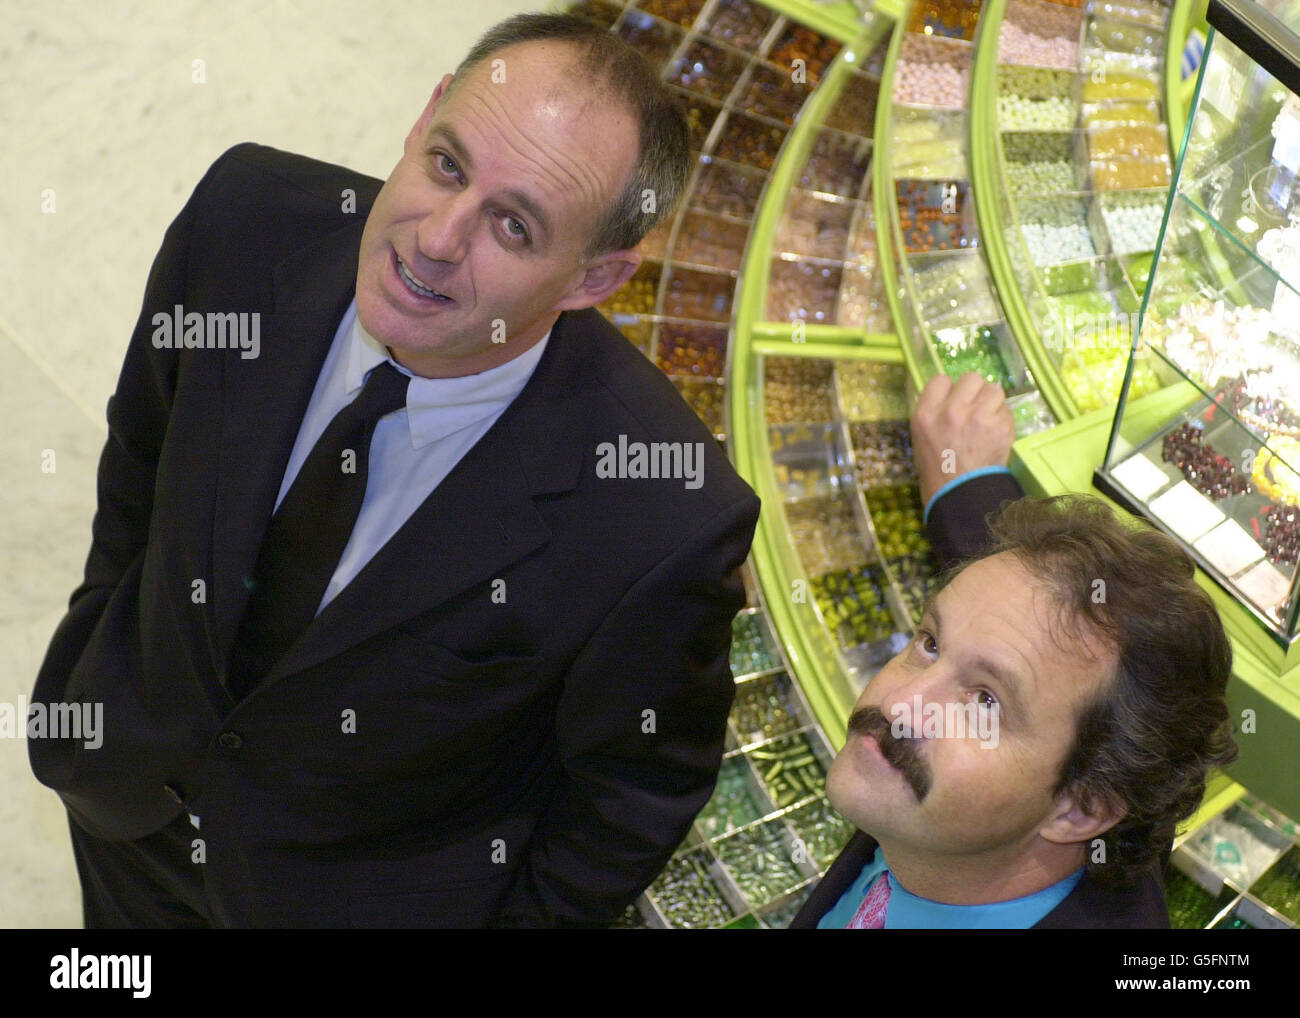 Chief Executive of Selfridges PLC, Vittorio Radice (left) with his Finance Director Peter Williams inside Selfridges central London store, on the eve of the announcement of the company's interim results. 09/12/02 : Selfridges boss Vittorio Radice, 45, who is being given a 1.2 million golden hello to jump ship and join Marks & Spencer. The Italian will also pocket an annual salary of 425,000, with the chance of doubling his money if performance targets are met. He is leaving Selfridges to run M&S s growing Home division, which sells sofas, lighting and bed linen in 25 stores across the UK. Stock Photo